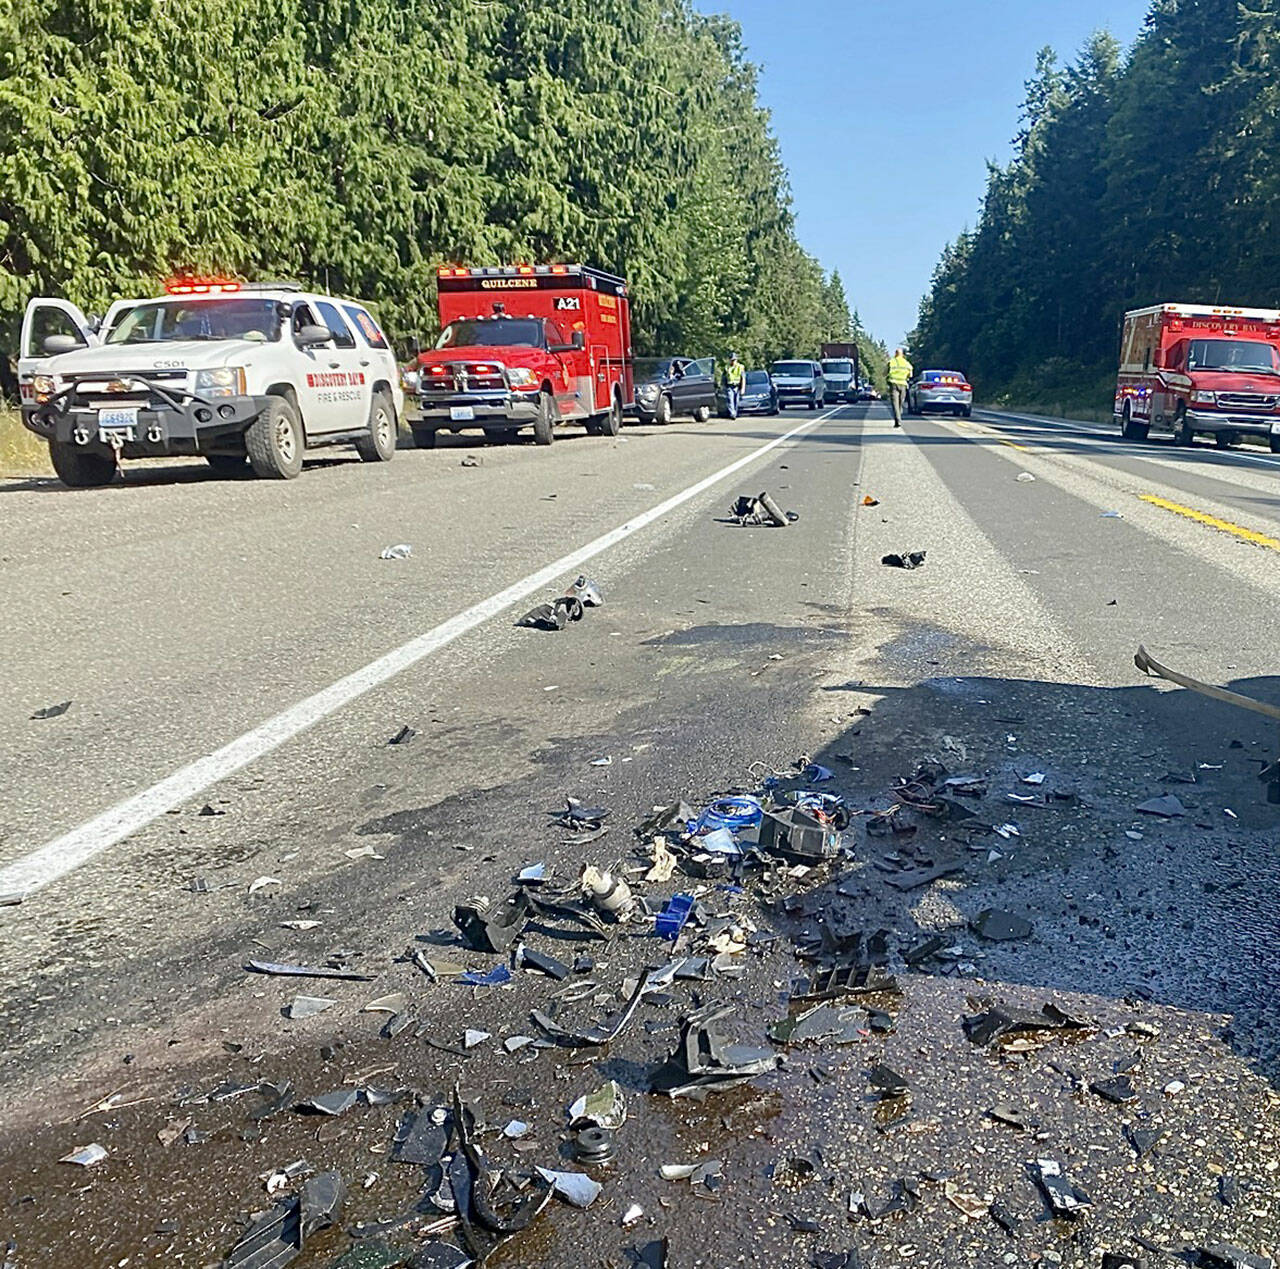 Two people died in a wreck Friday on U.S. Highway 101. (State Patrol)